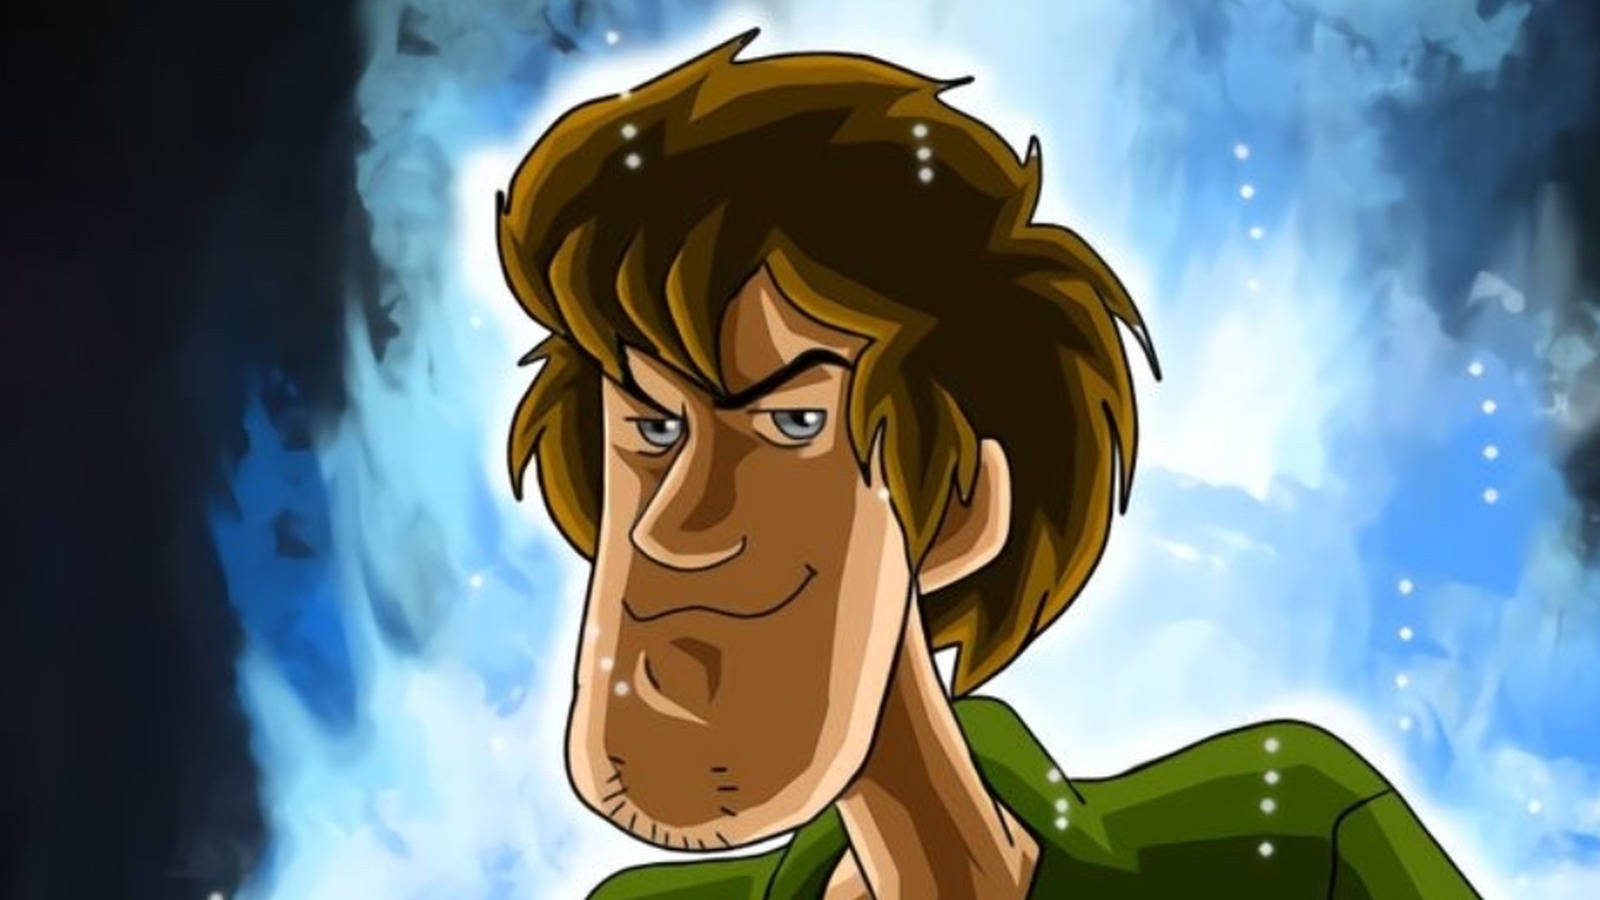 Shaggy Rogers In His Signature Green Shirt And Red Pants With A Funny Expression. Wallpaper